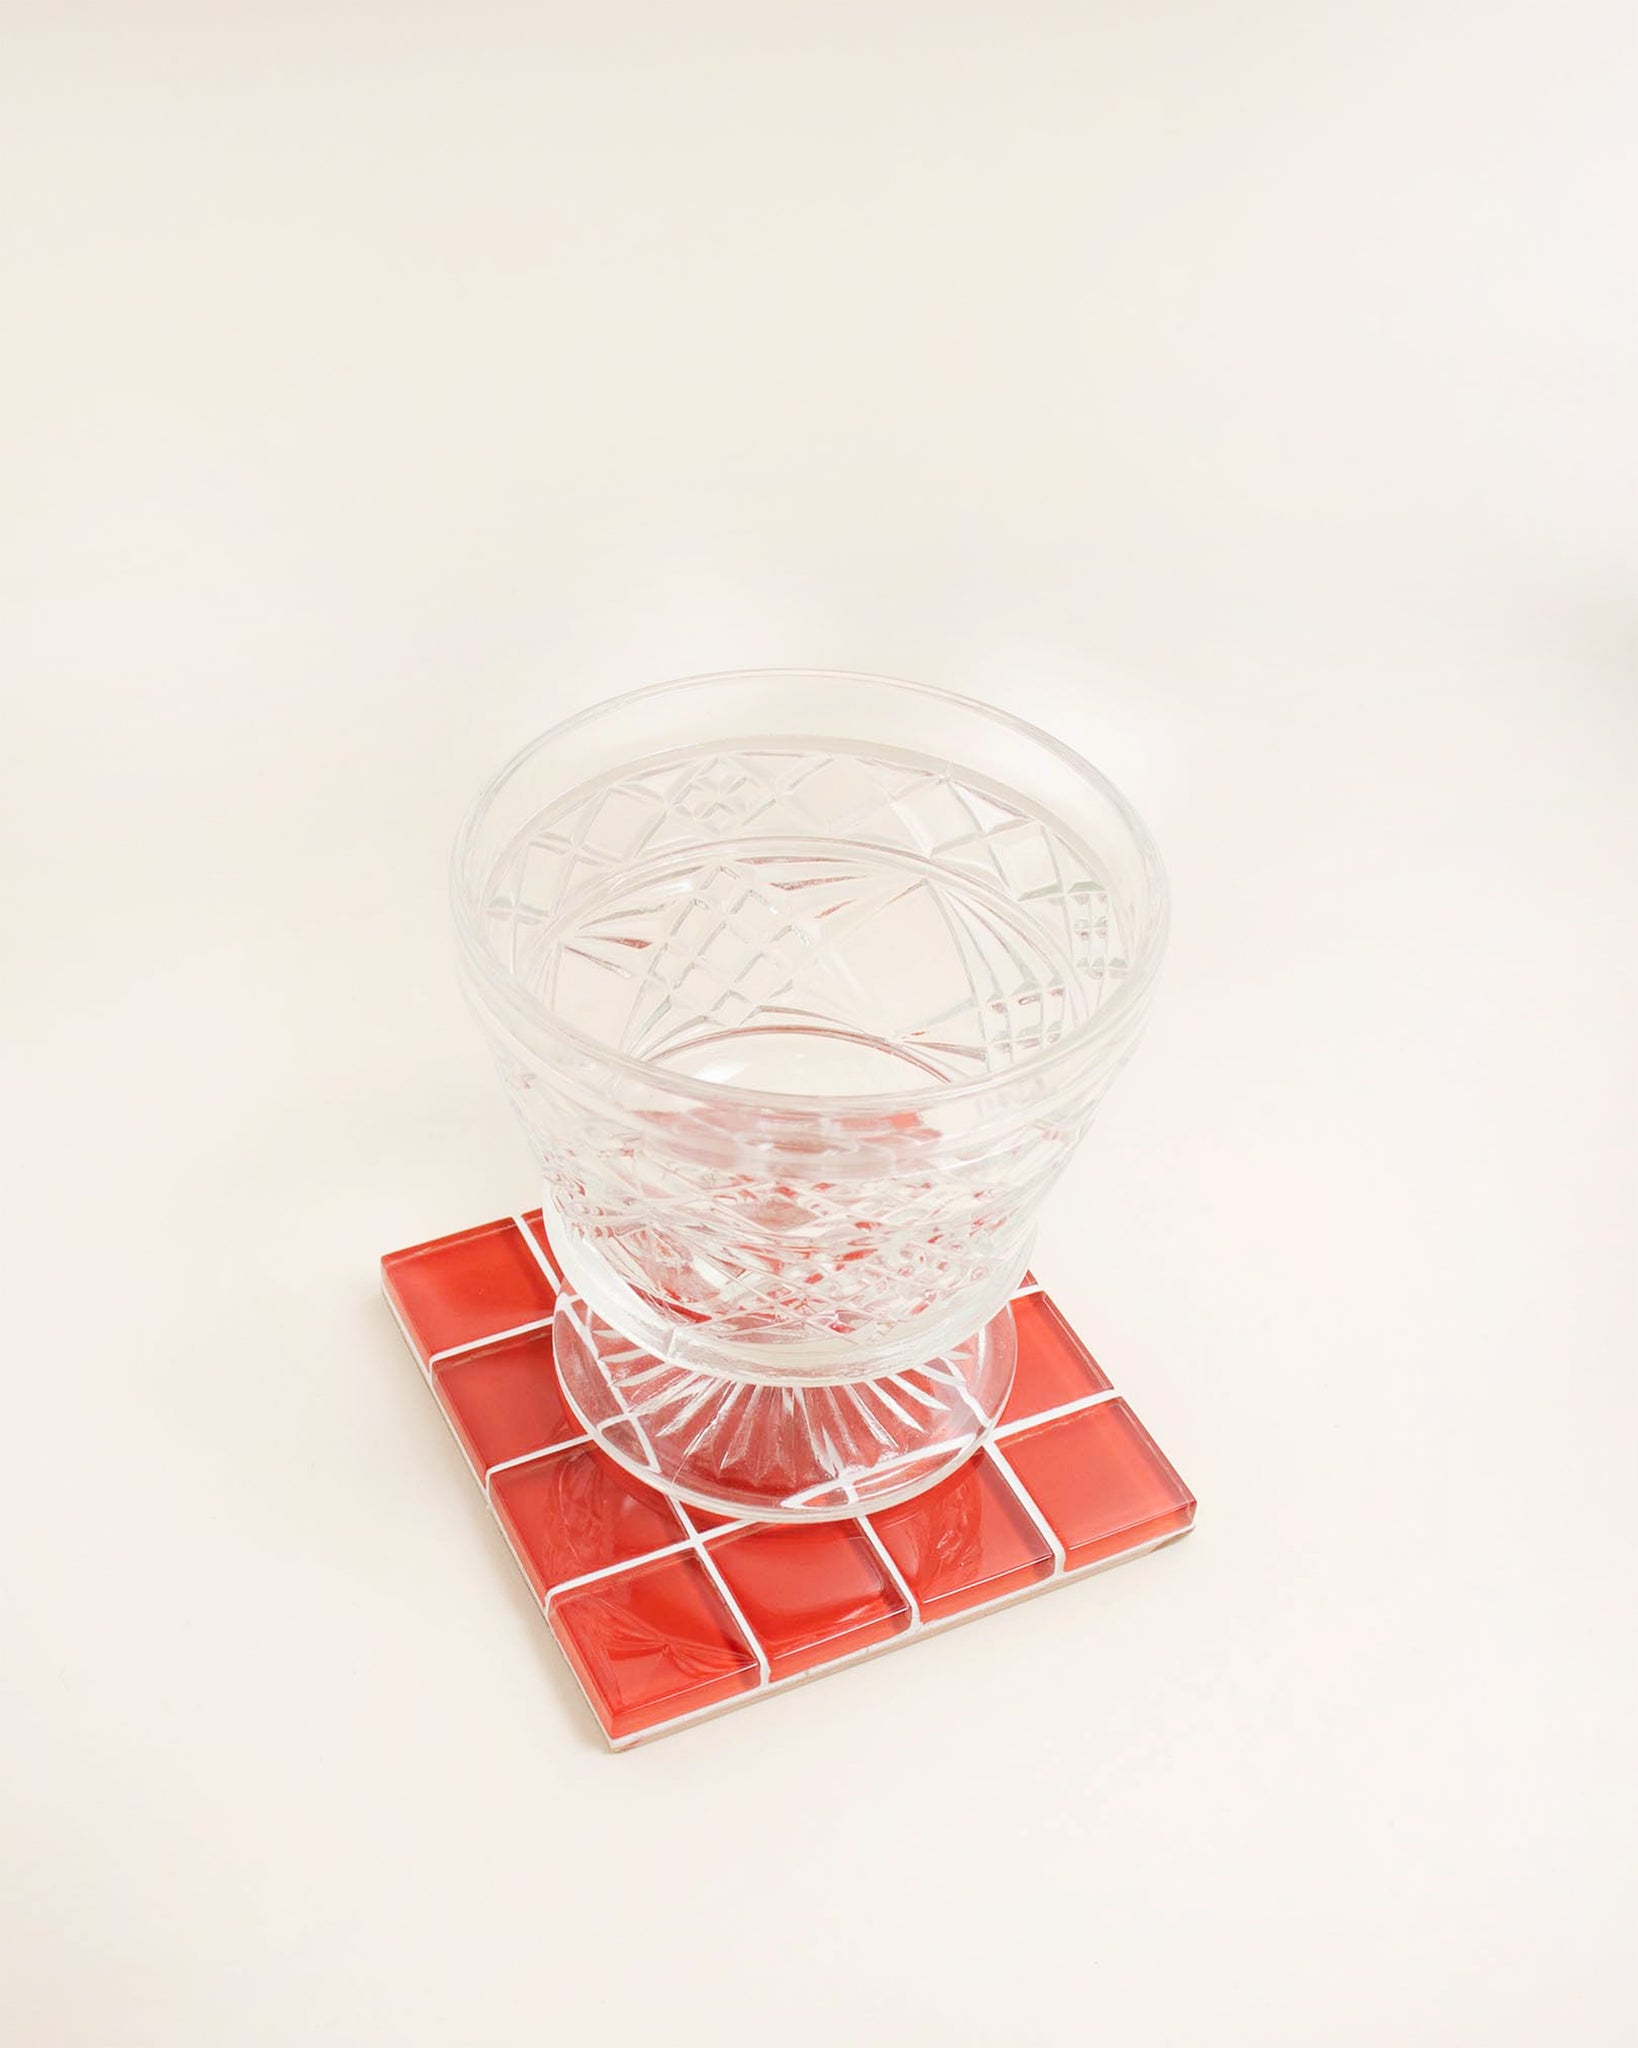 GLASS TILE COASTER - It's Apple Red